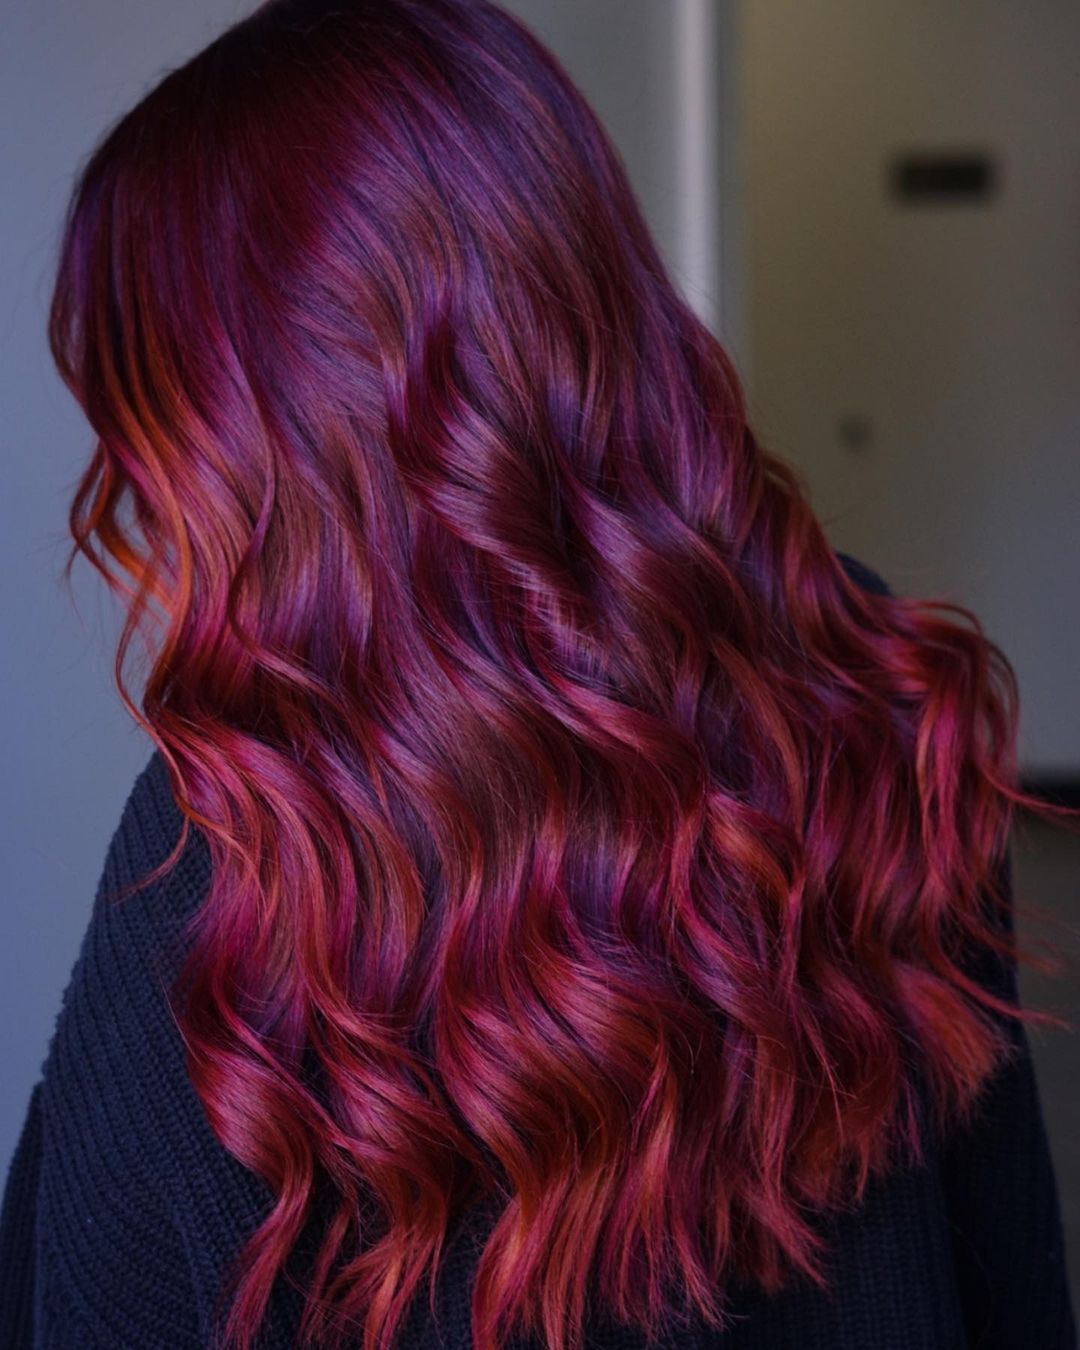 Dark Purple Hairstyle with Wine Red Highlights